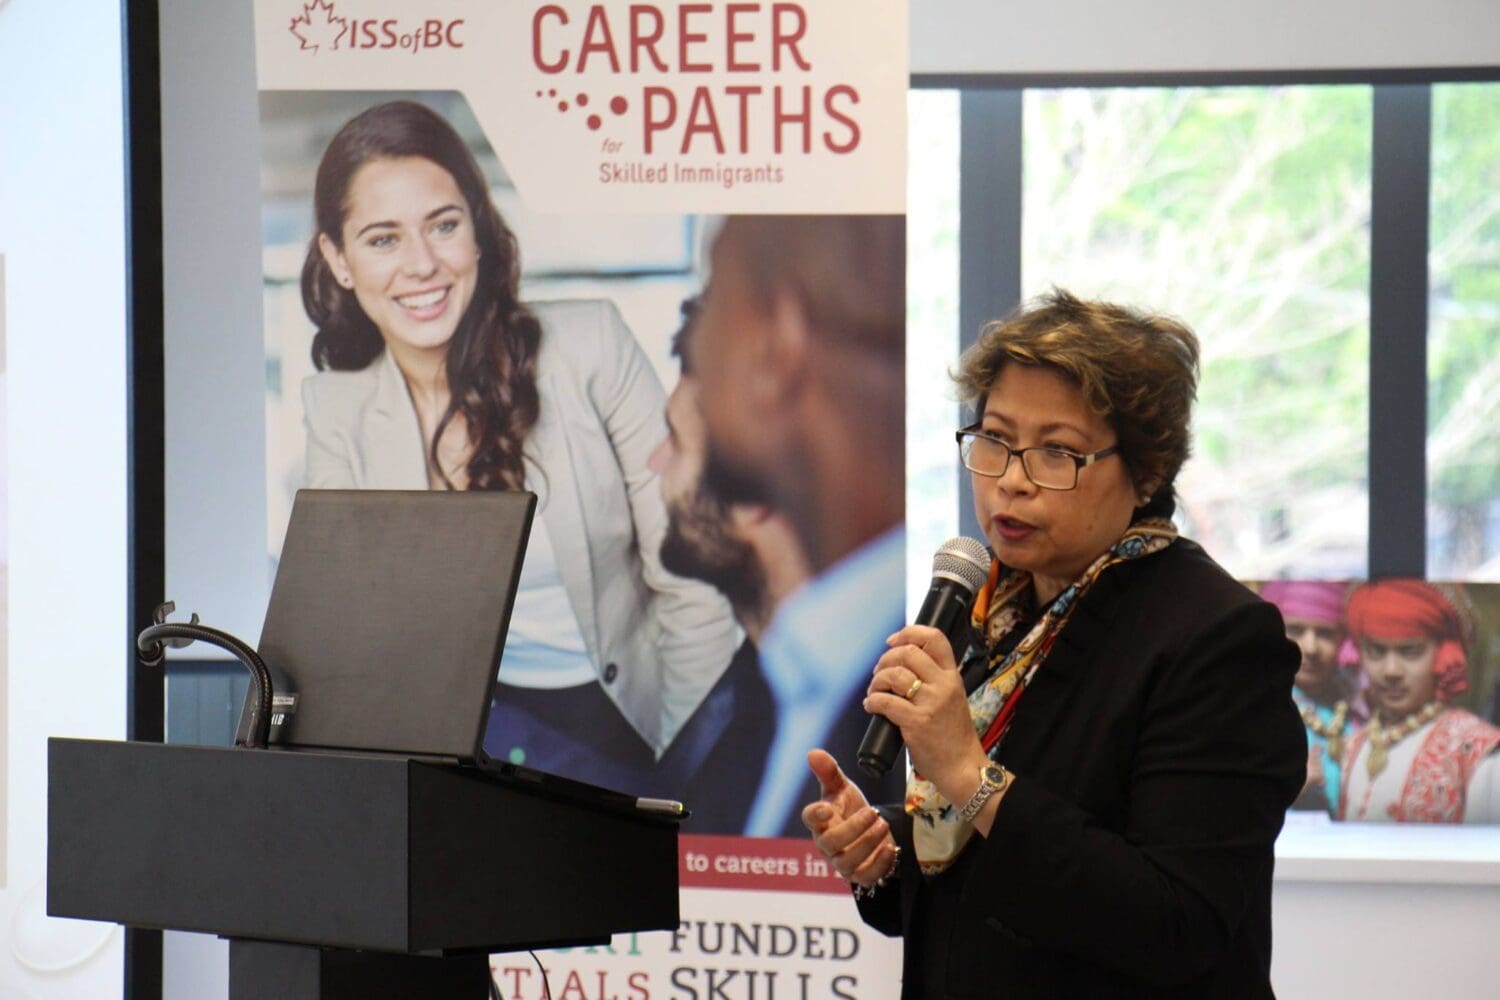 ISSofBC launches Career Paths for Skilled Immigrants